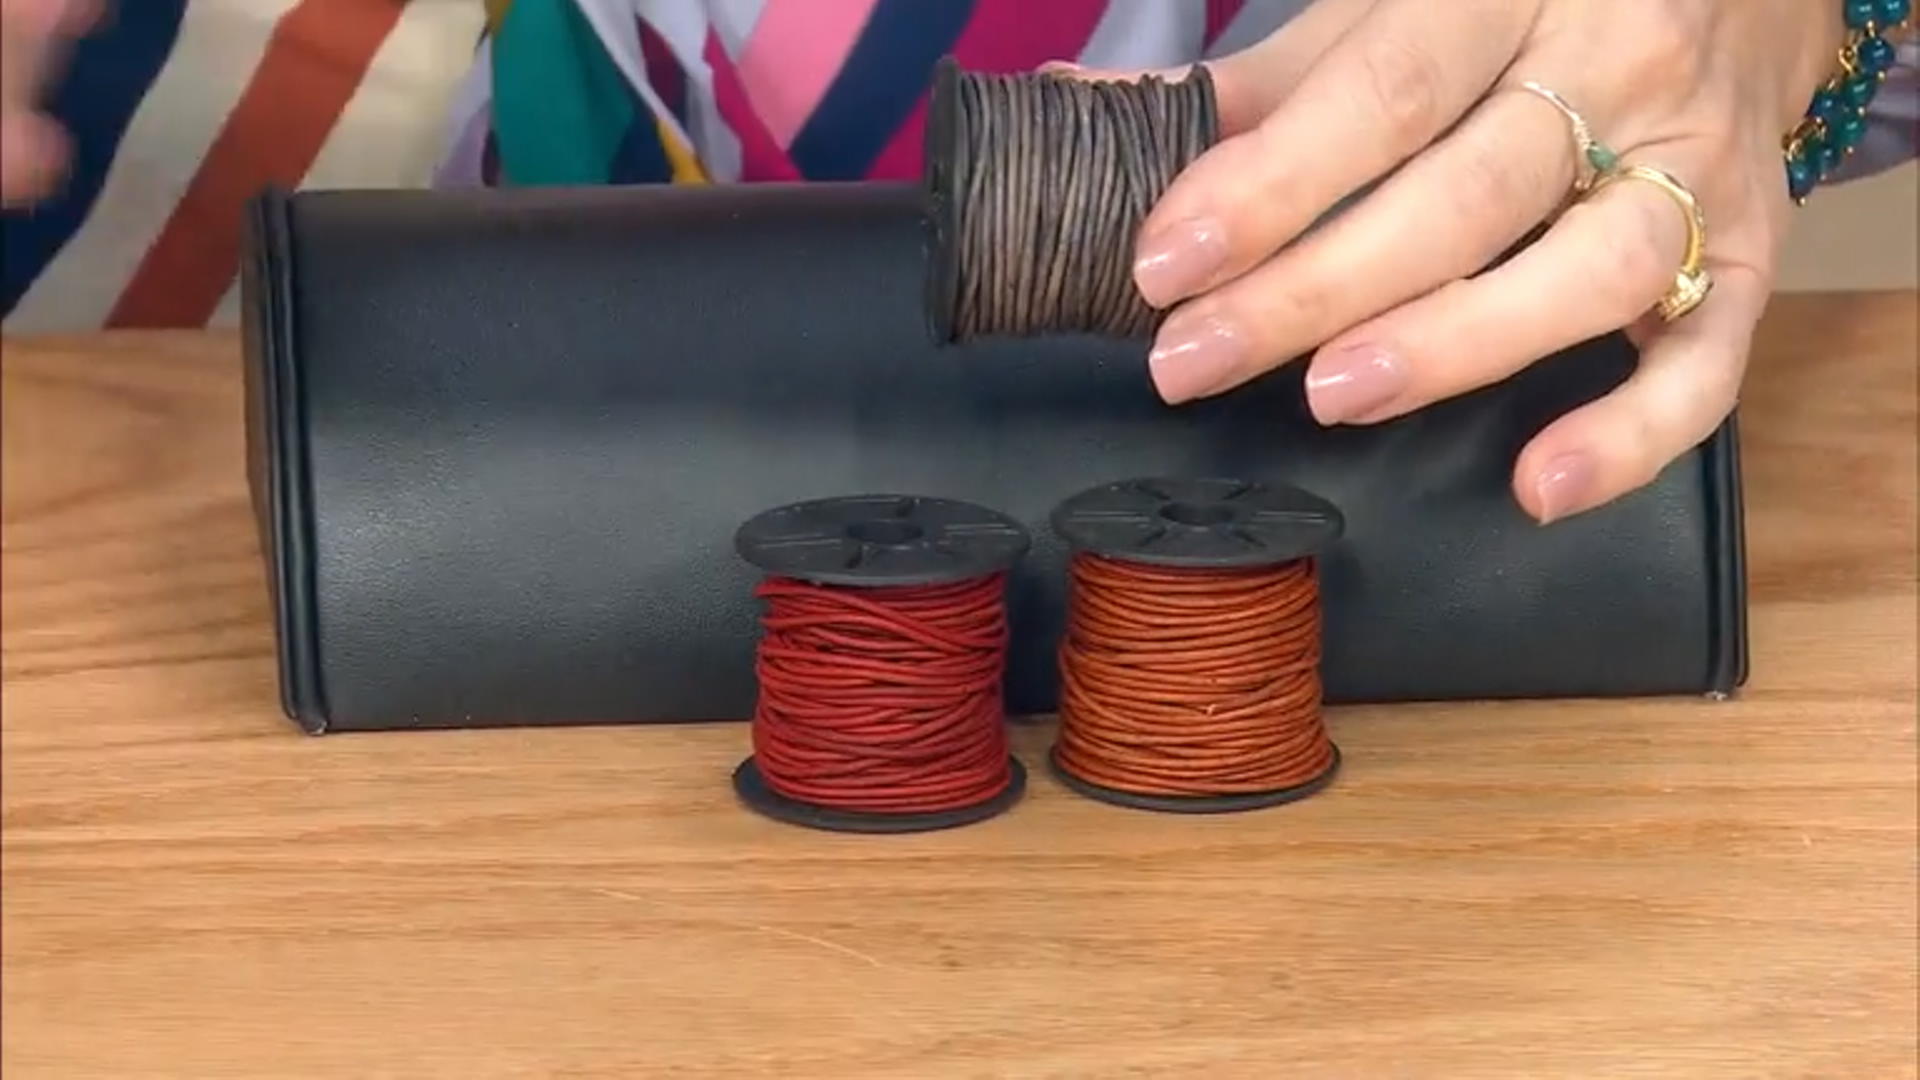 Leather Cord Set of 3 in Natural Light Brown, Natural Gray, and Natural Red Appx 1.5mm Appx 10M Each Video Thumbnail